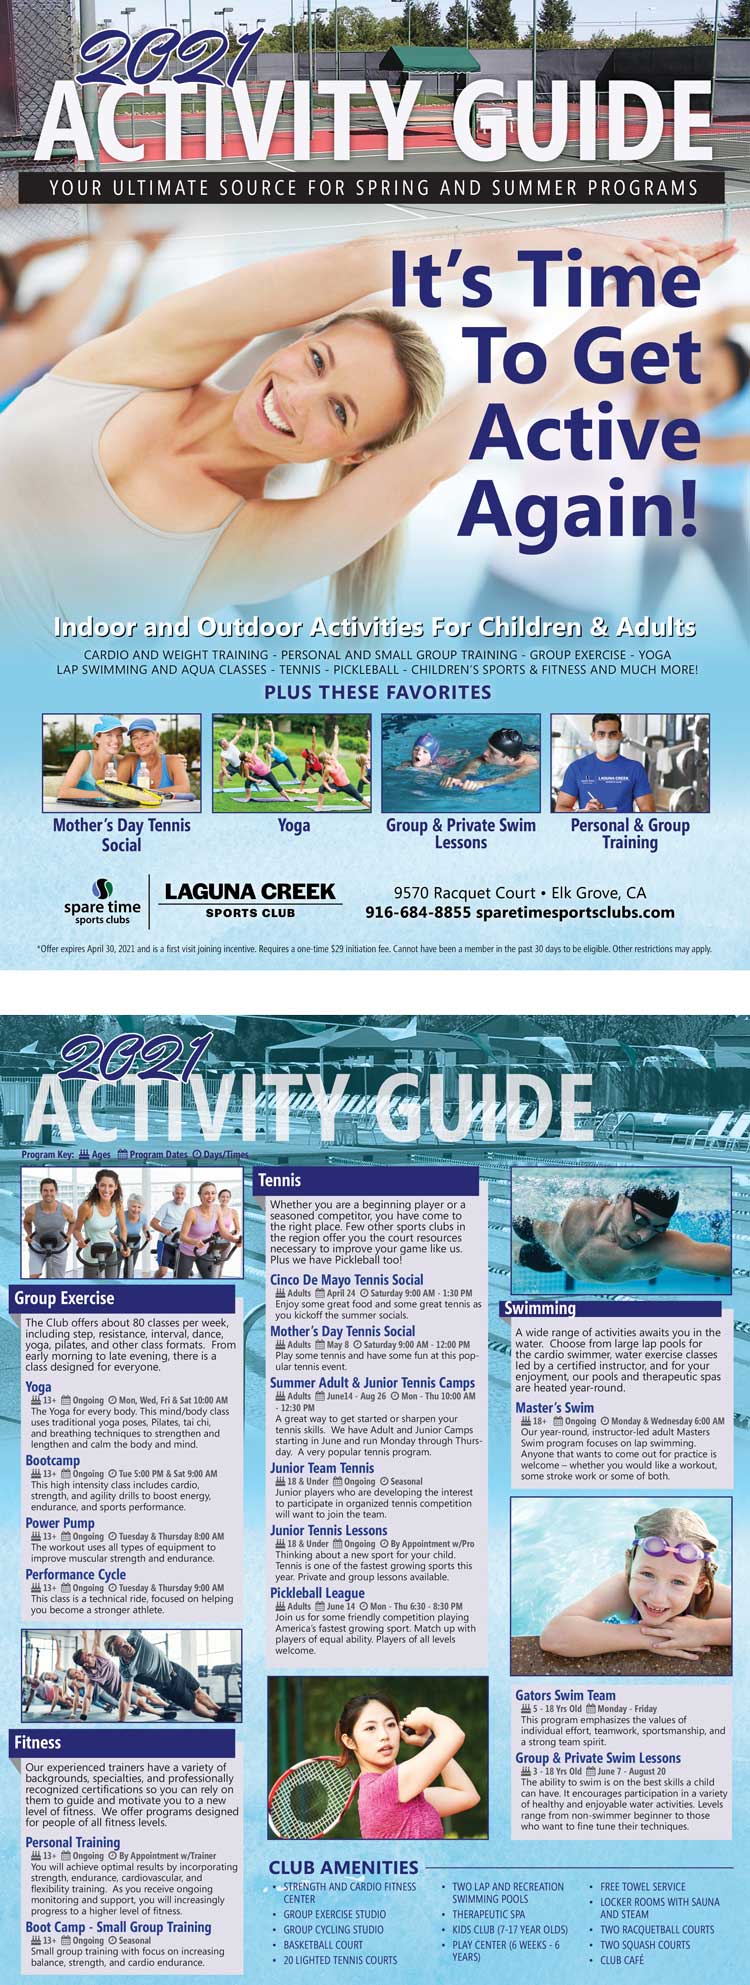 2021 Activity Guide Infography